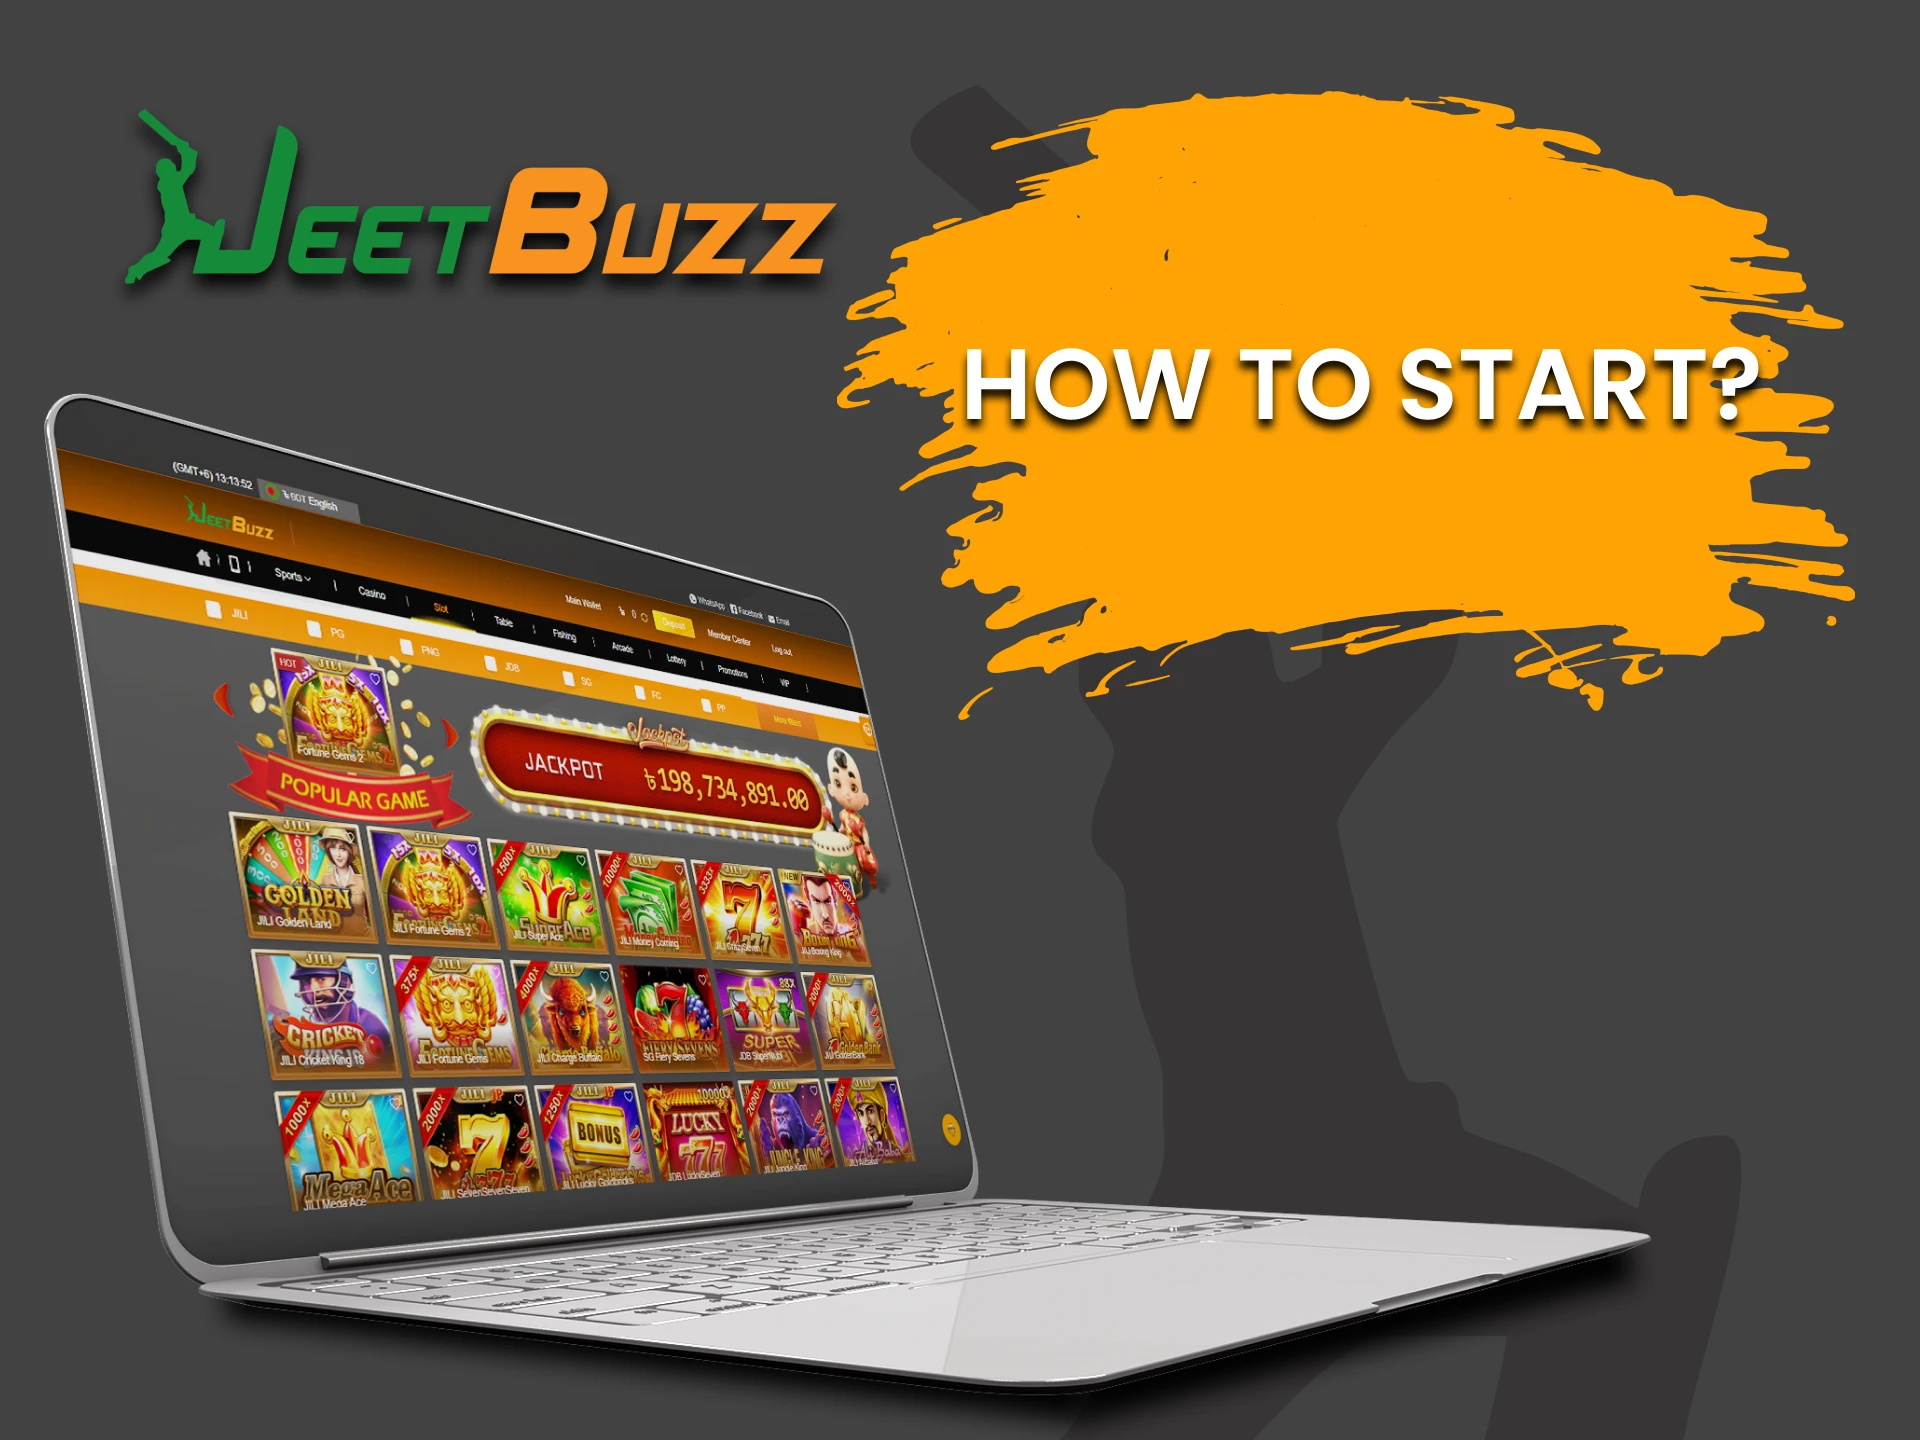 Select the desired section on JeetBuzz to play Slots.